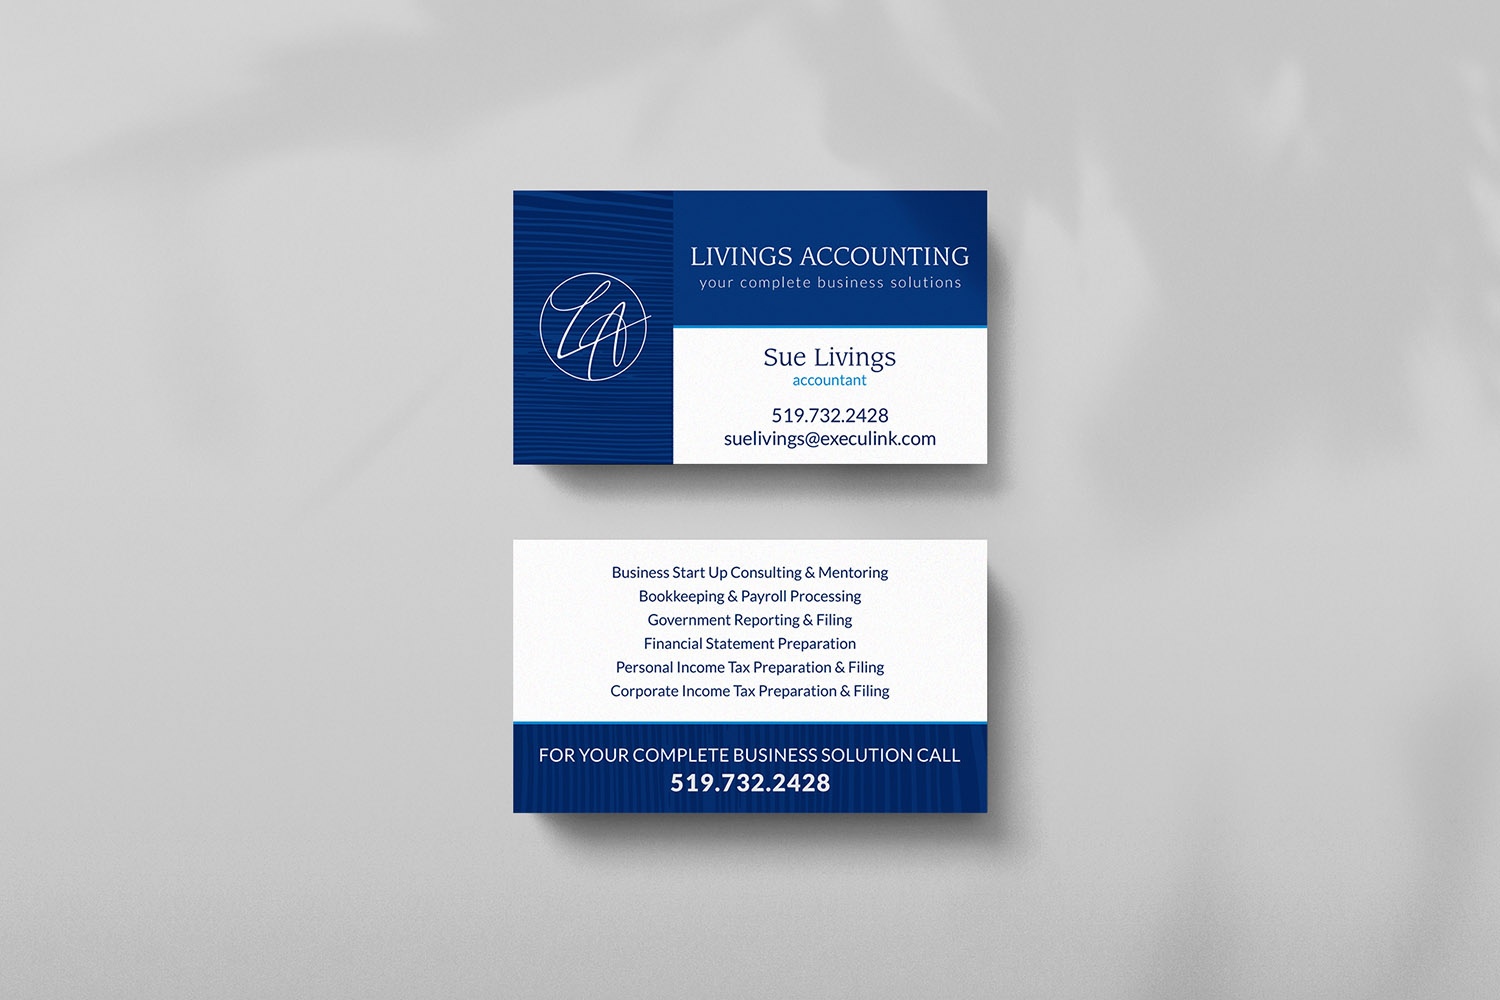 Livings Accounting business cards design